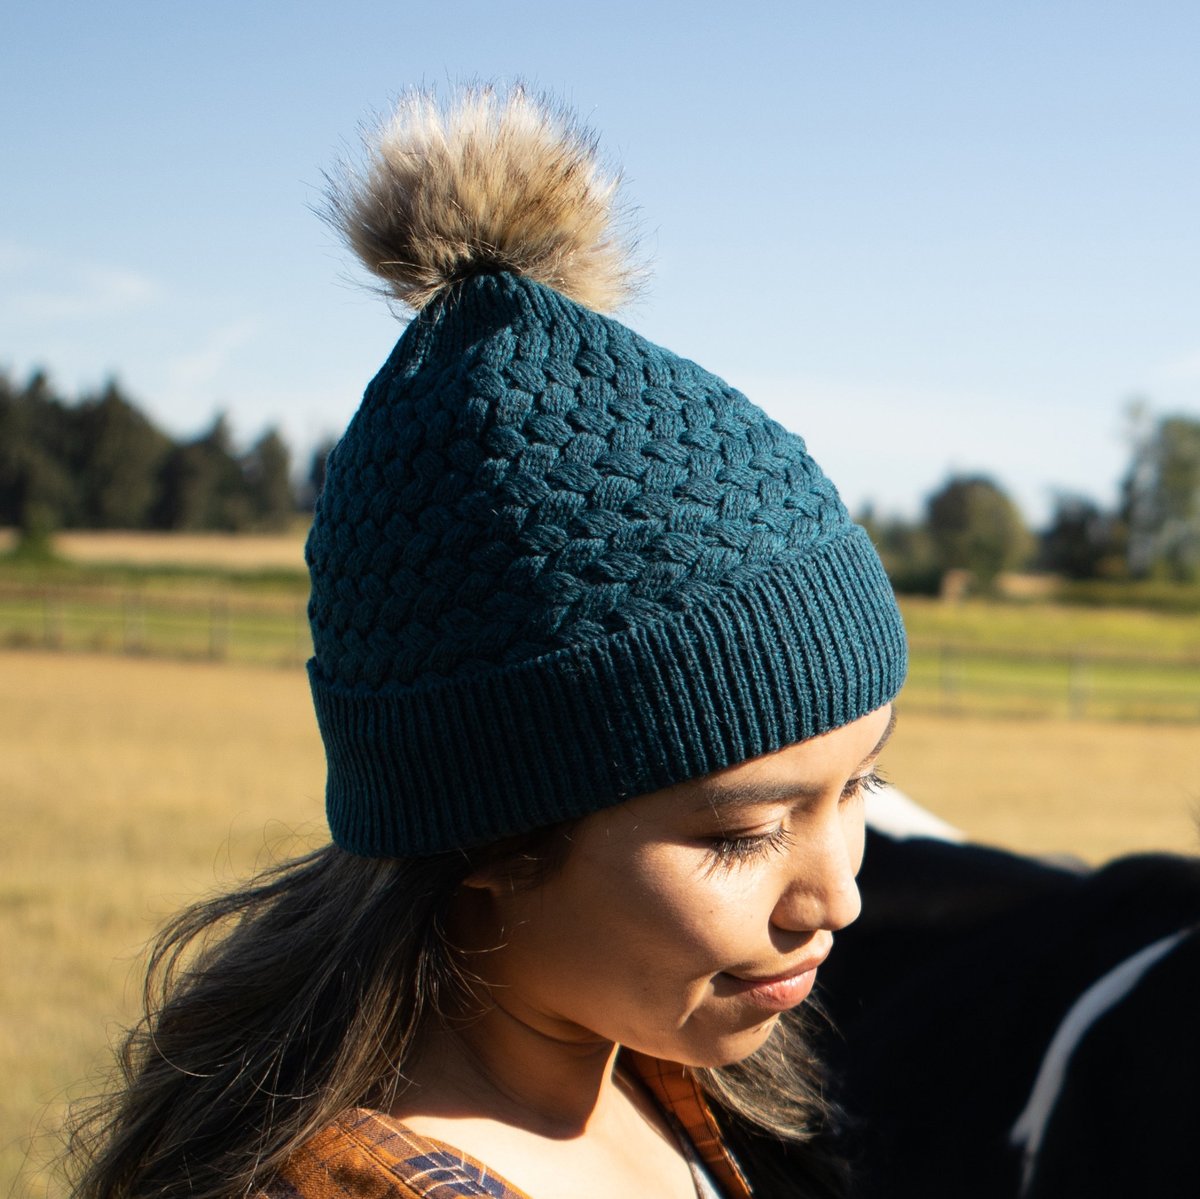 Sunday Afternoons Tranquil Merino Beanie - Big Kid / Conifer